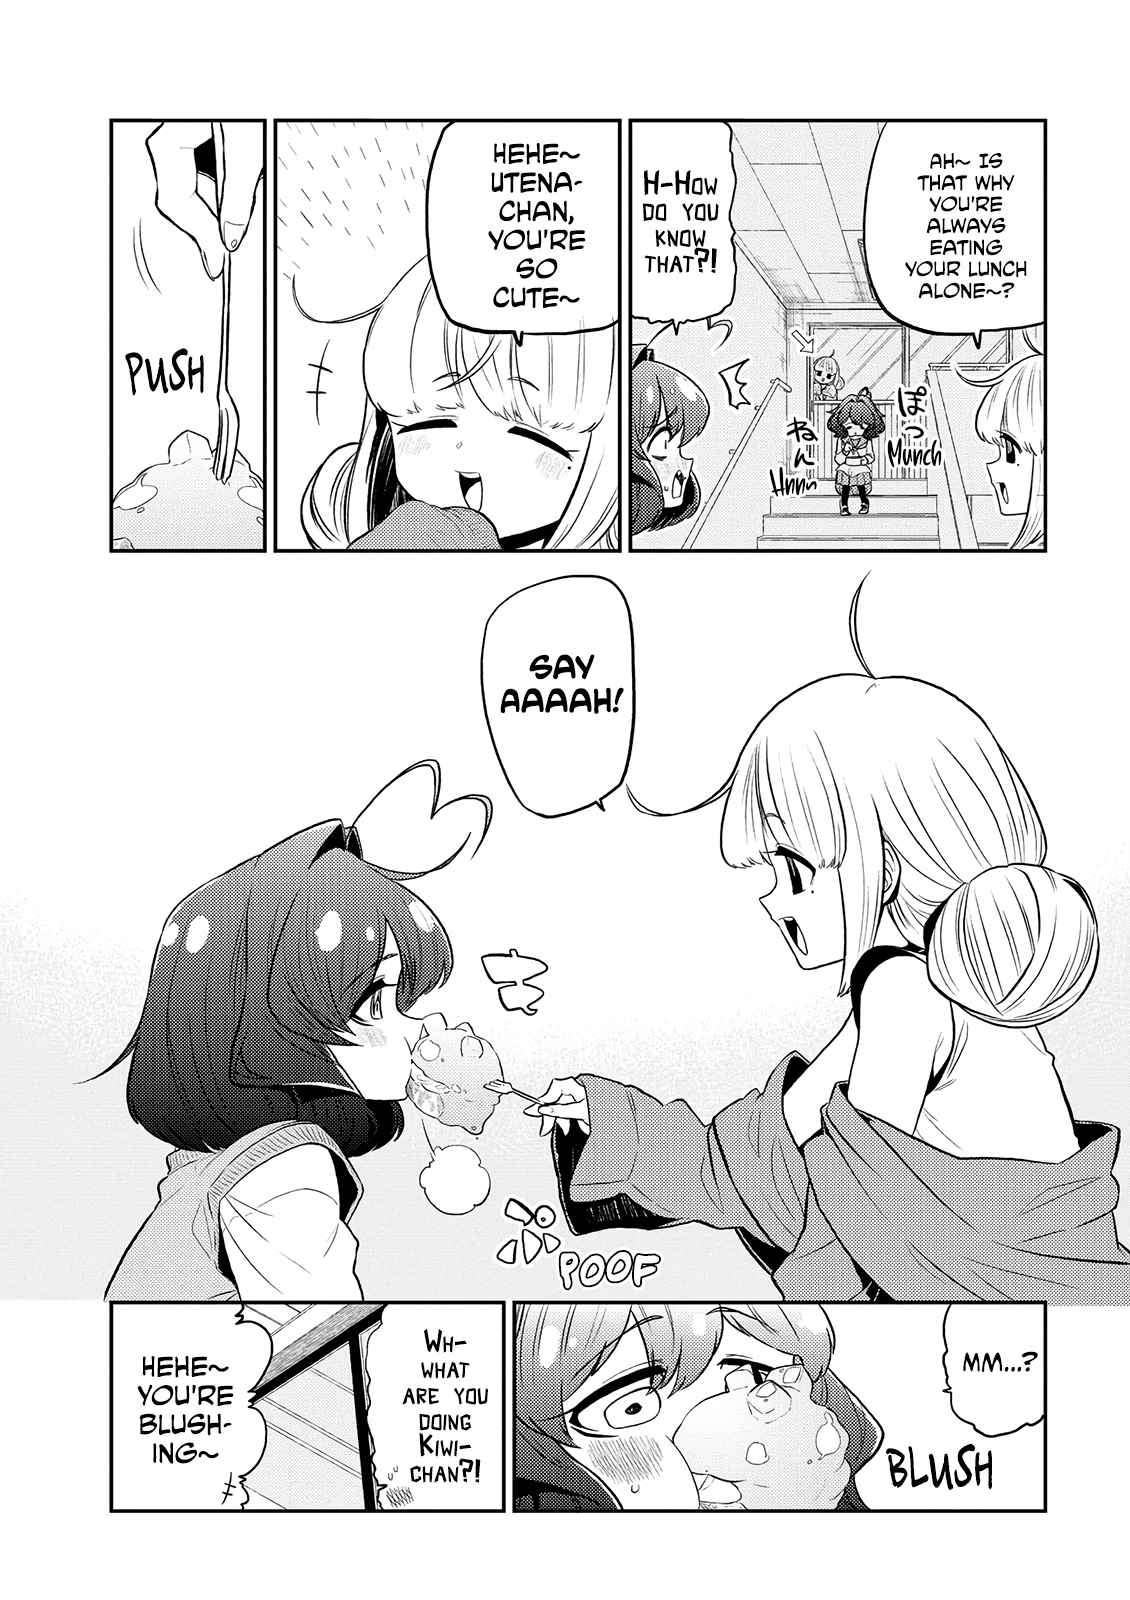 Looking Up To Magical Girls Vol. 1 Ch. 7